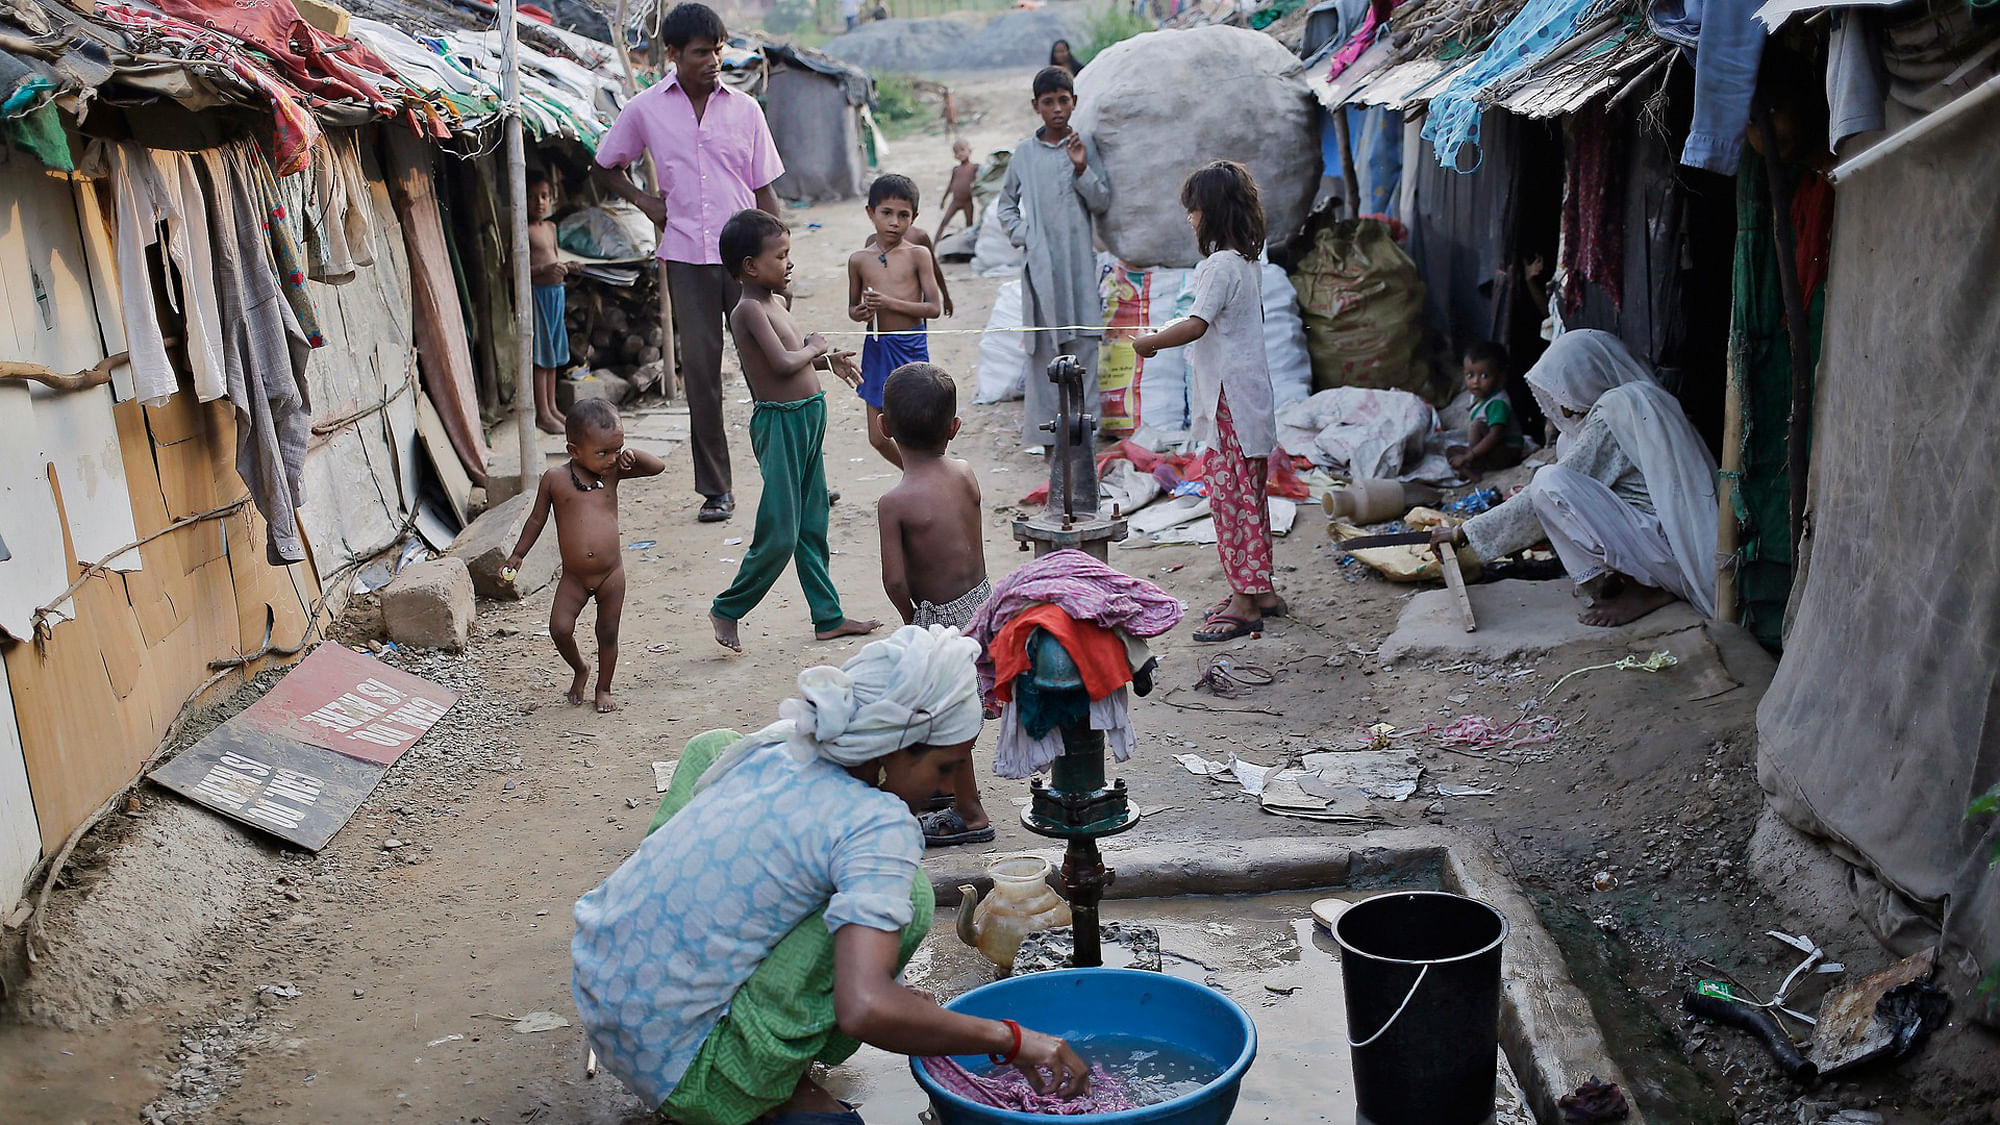 Bangladesh plans to shift thousands of Rohingya Muslims from Myanmar to a flooded island to prevent them from “intermingling” with Bangladeshi citizens. (Photo: Reuters)